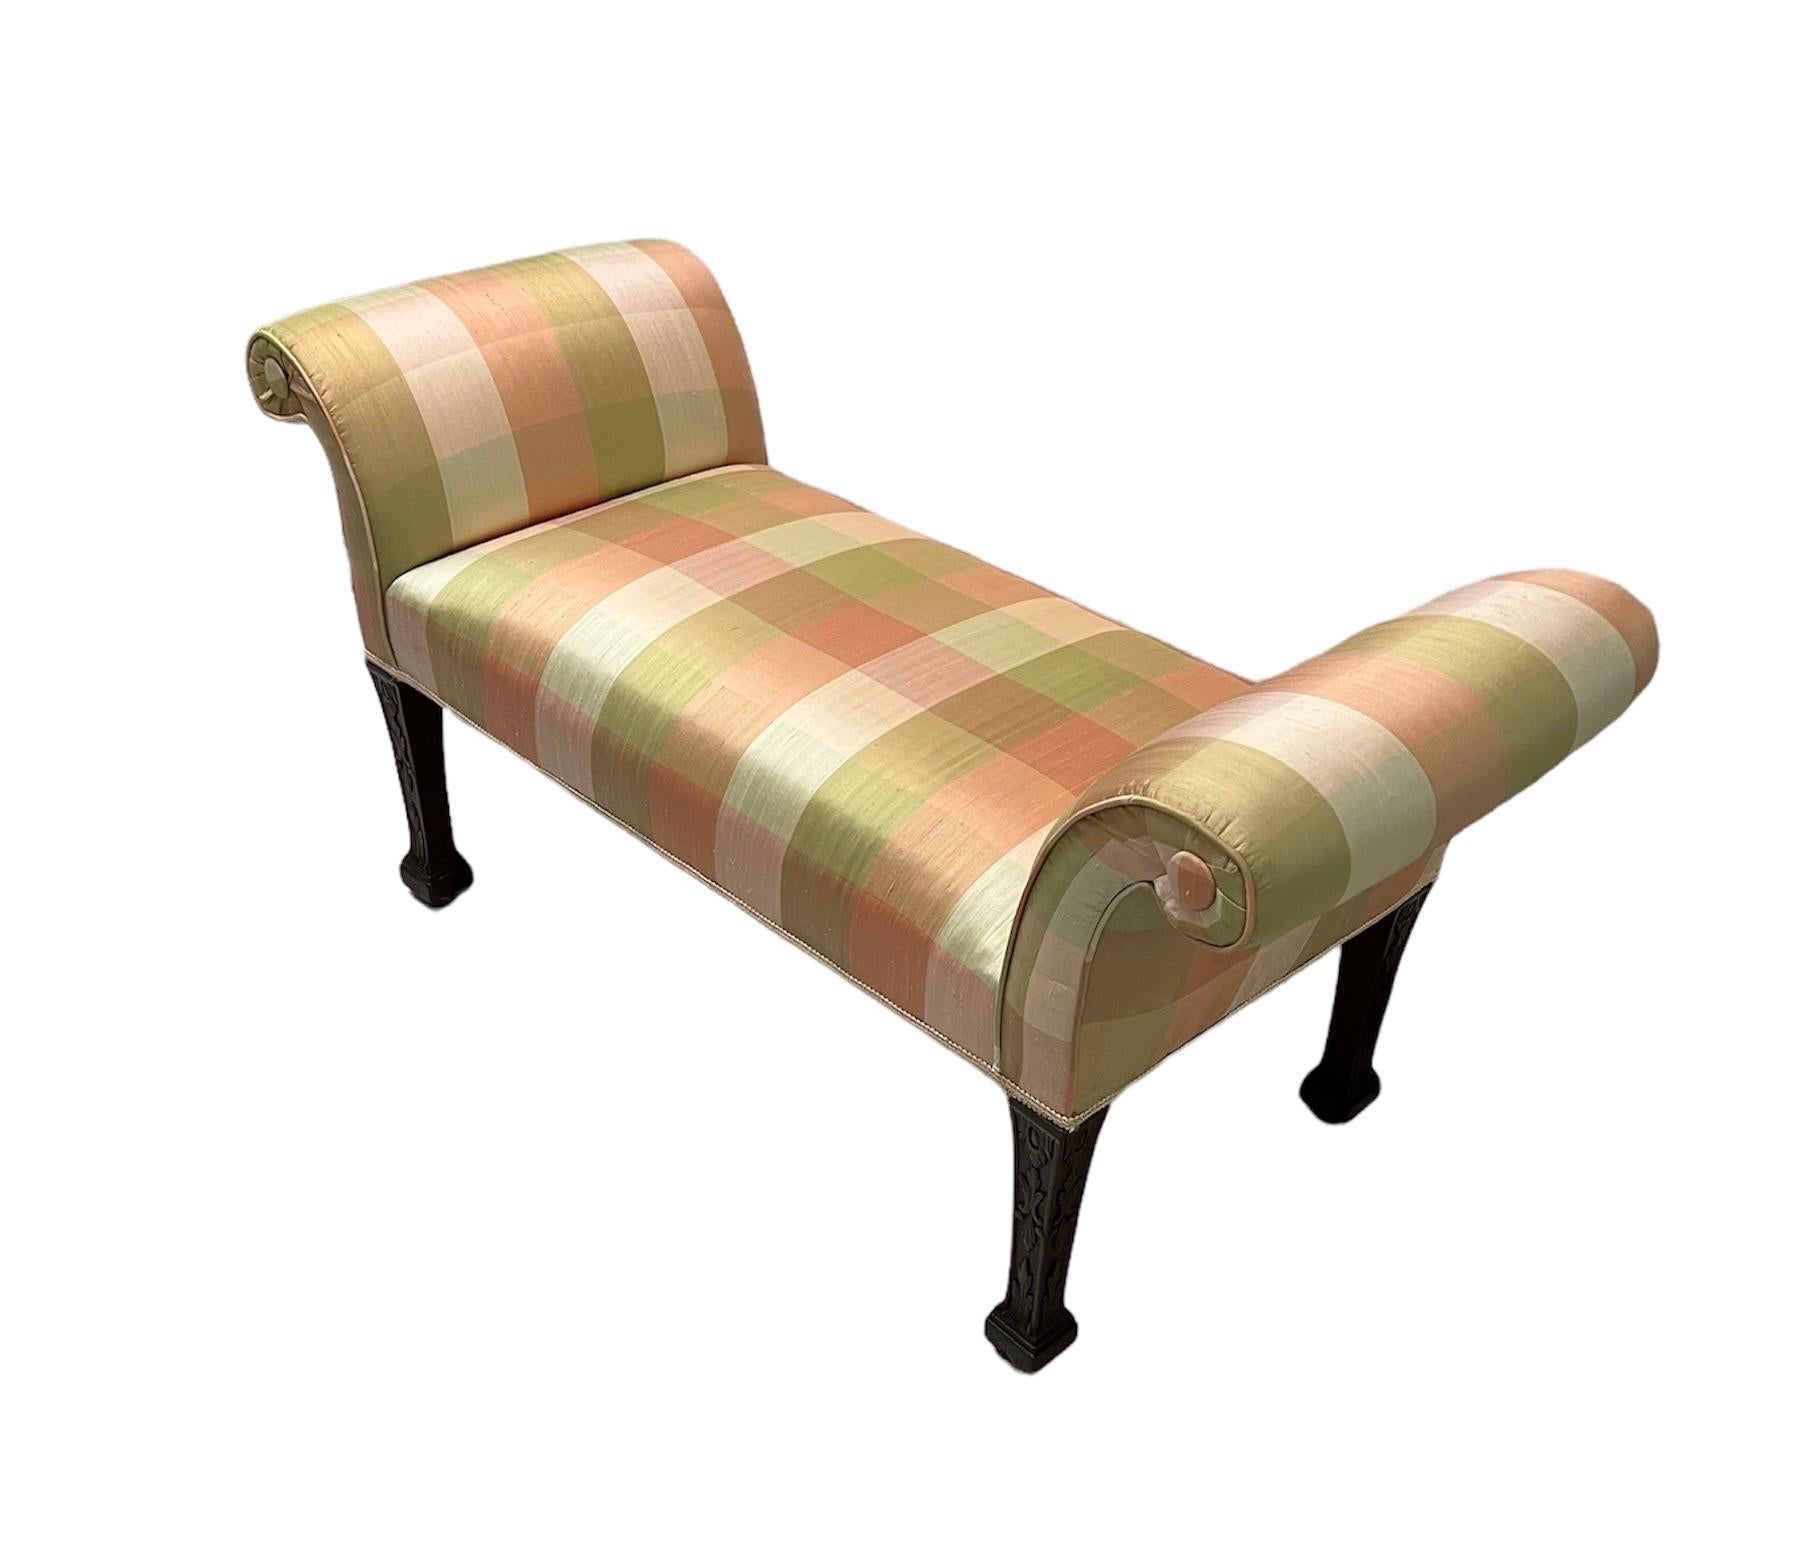 George III mahogany window bench
Scrolled upholstered arms, Upholstered seat
With gimp trim on carved square tapering legs. Legs terminating in square feet concealing leather castors.